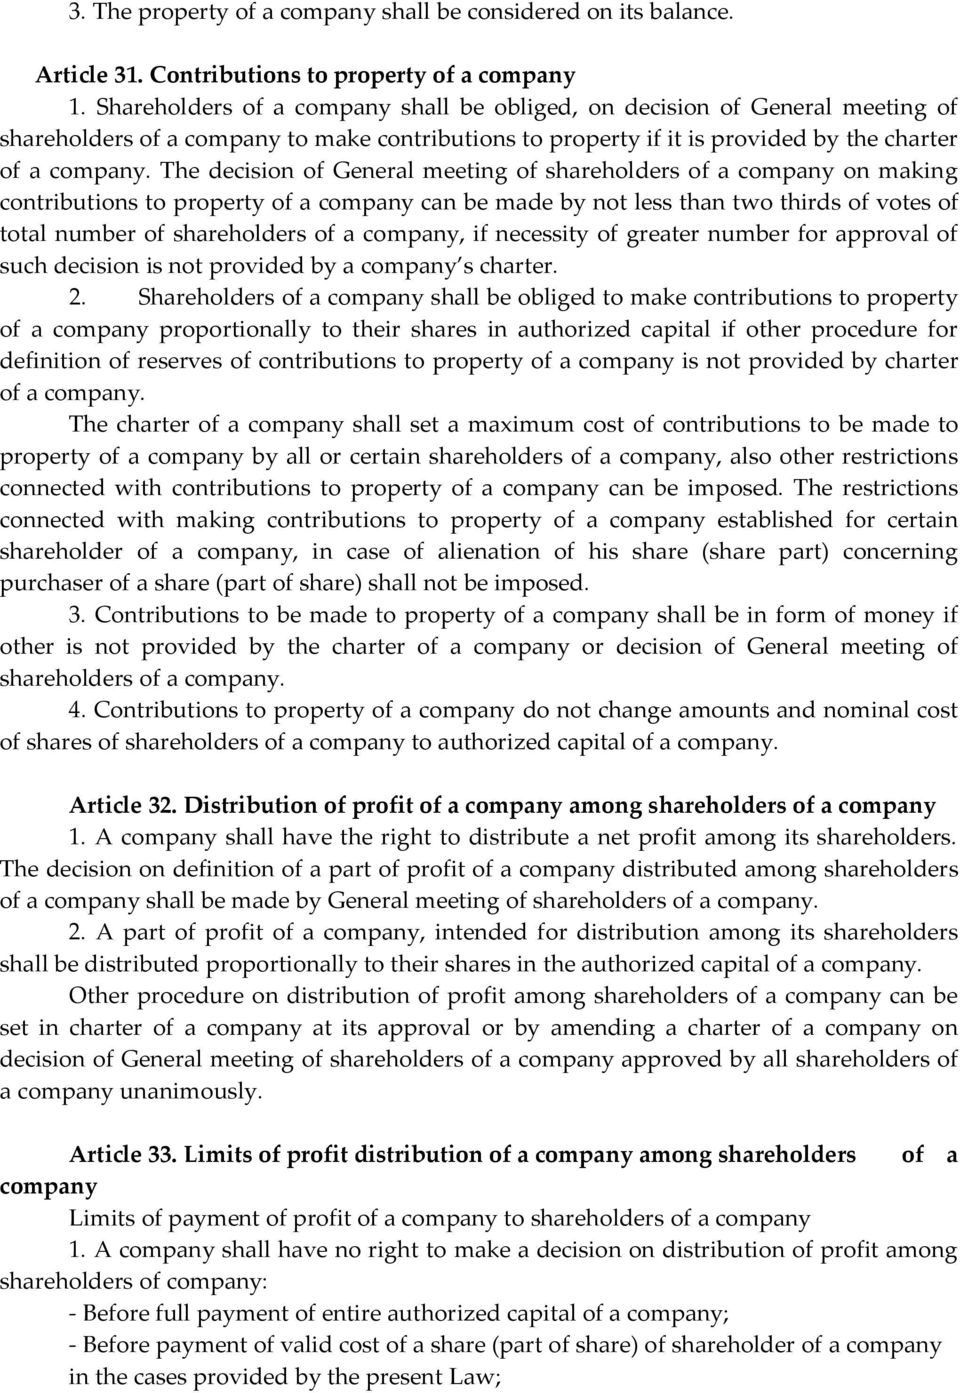 The decision of General meeting of shareholders of a company on making contributions to property of a company can be made by not less than two thirds of votes of total number of shareholders of a